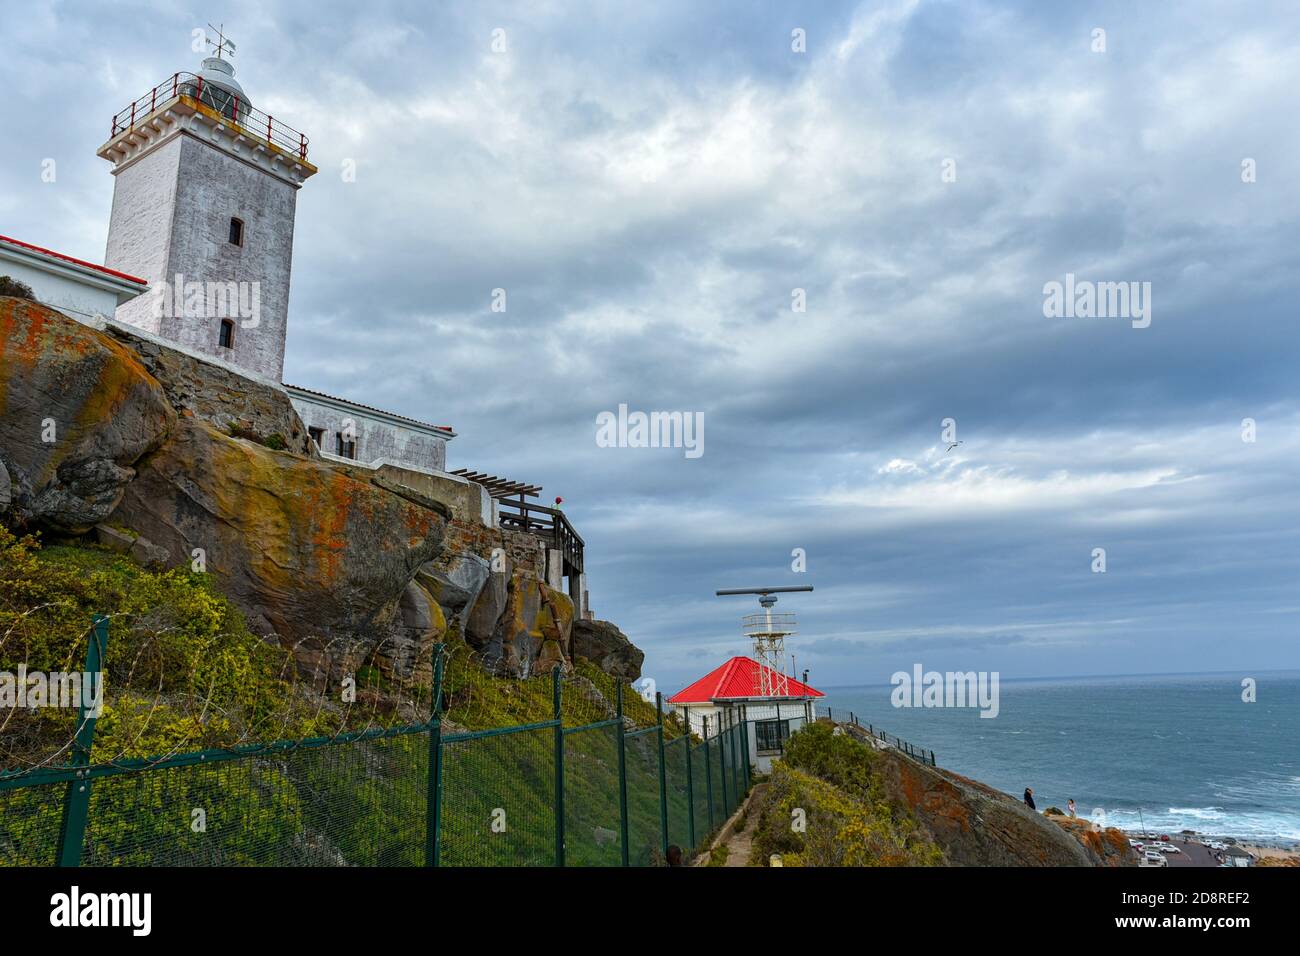 Cape St Blaize Lighthouse at Mossel Bay, Garden Route Africa is a magnificent landmark to see on the Garden Route, South Africa Stock Photo